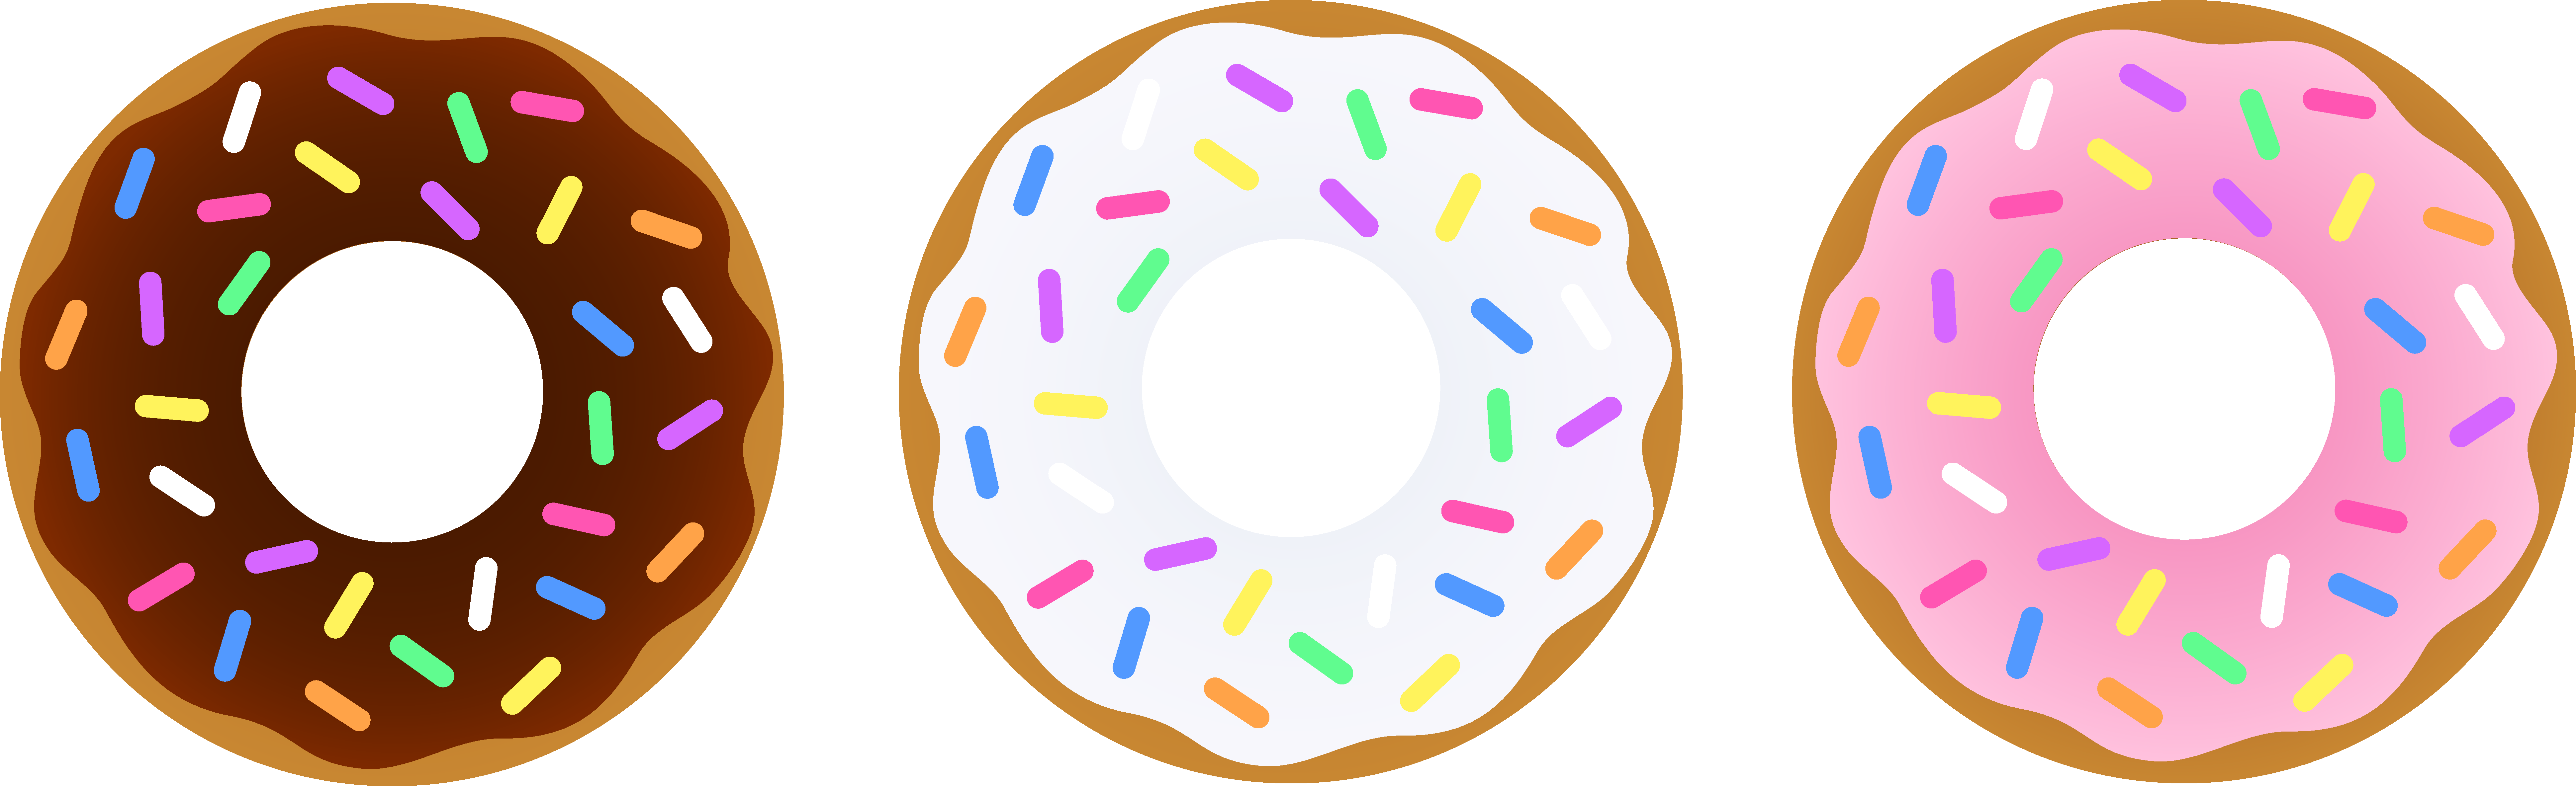 Three Sprinkled Donuts - Free Clip Art